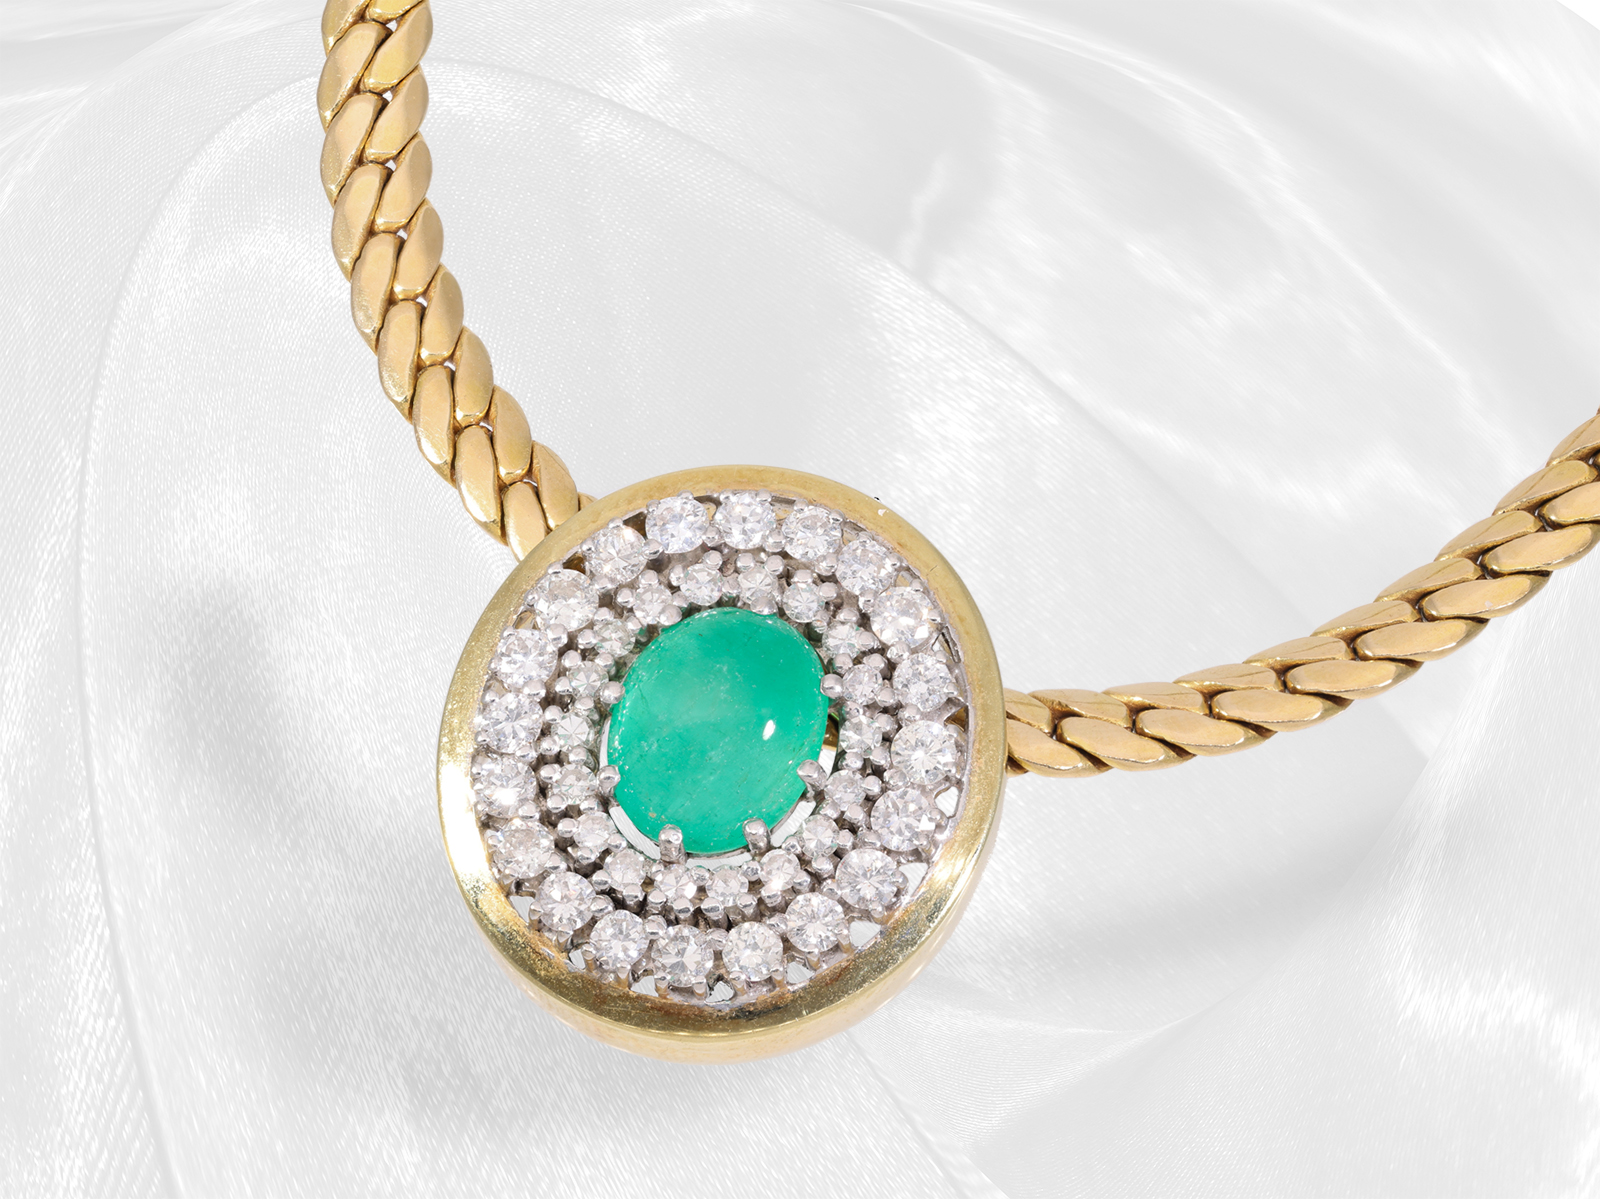 High-quality gold necklace with large emerald/brilliant-cut diamond gold pendant, approx. 6.14ct - Image 5 of 5